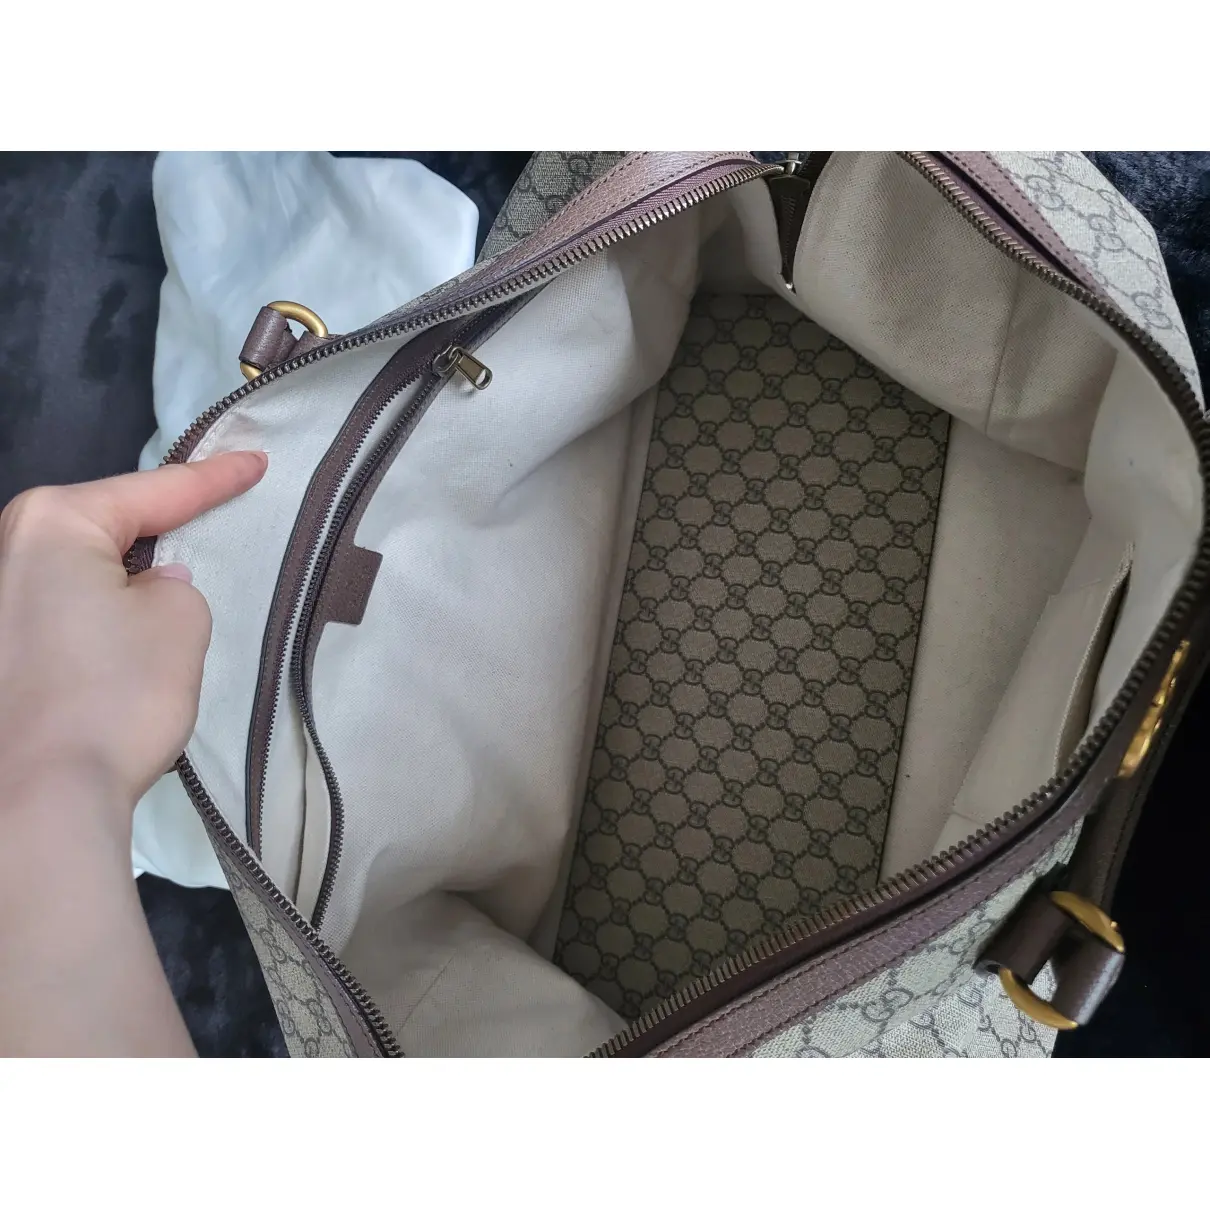 Ophidia leather travel bag Gucci